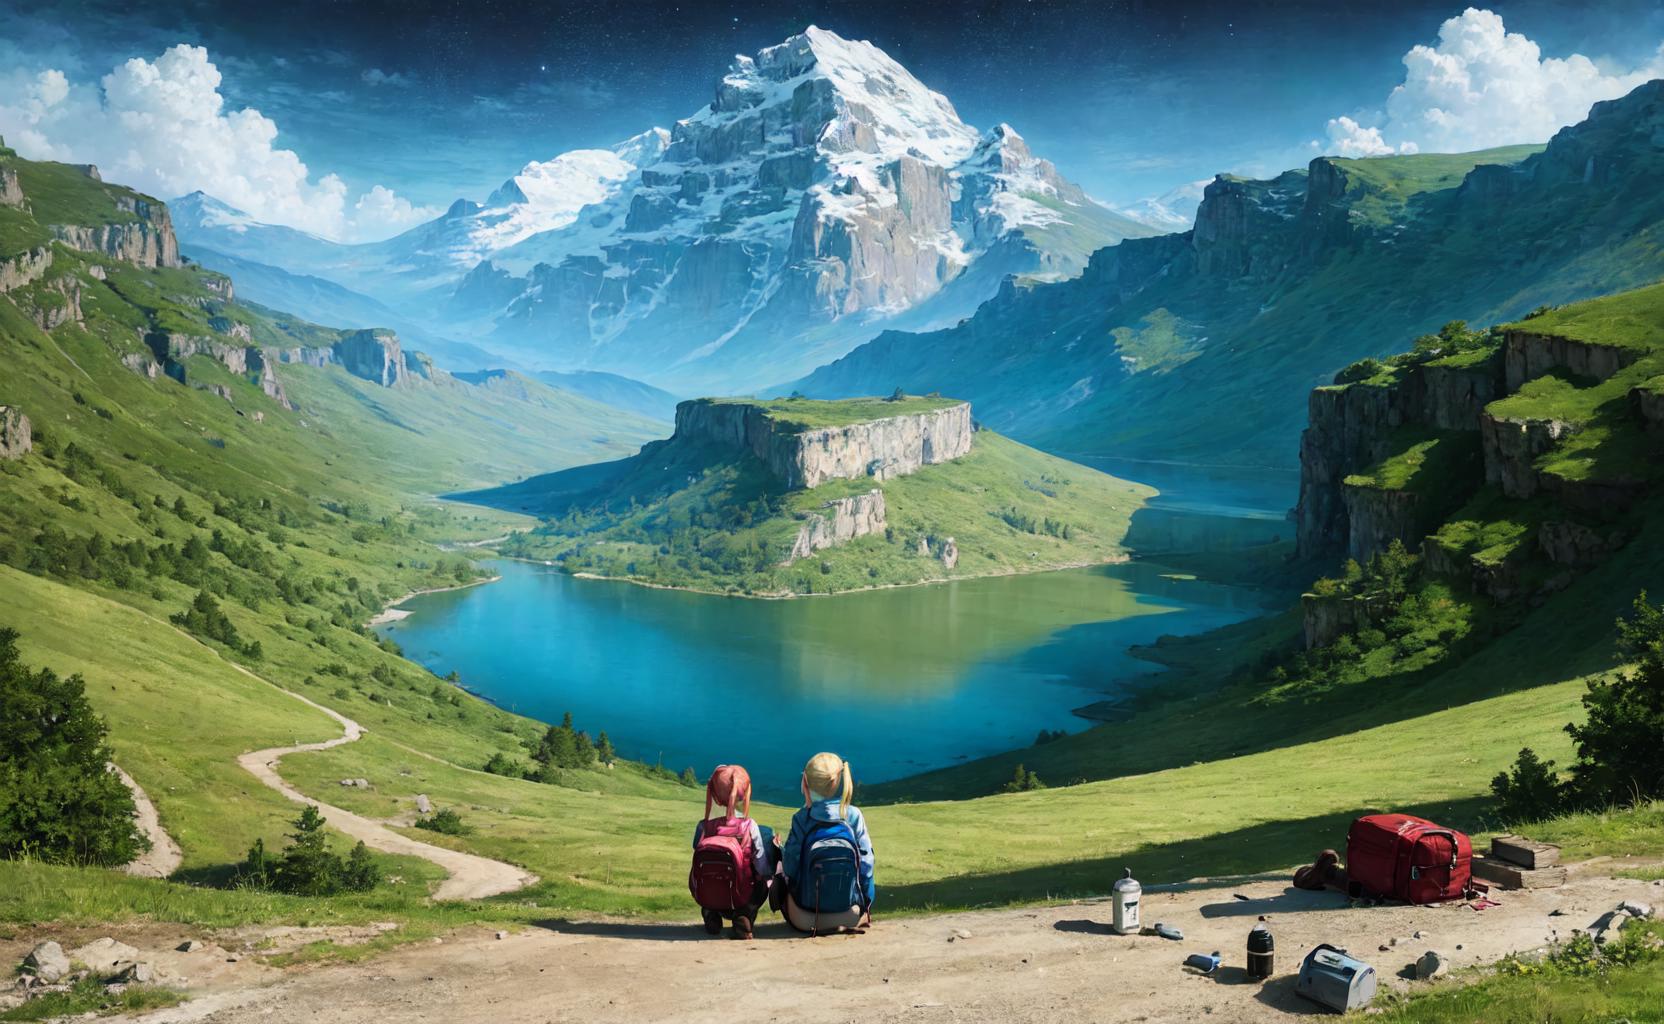 Two girls sitting on a hill overlooking a lake and mountains.